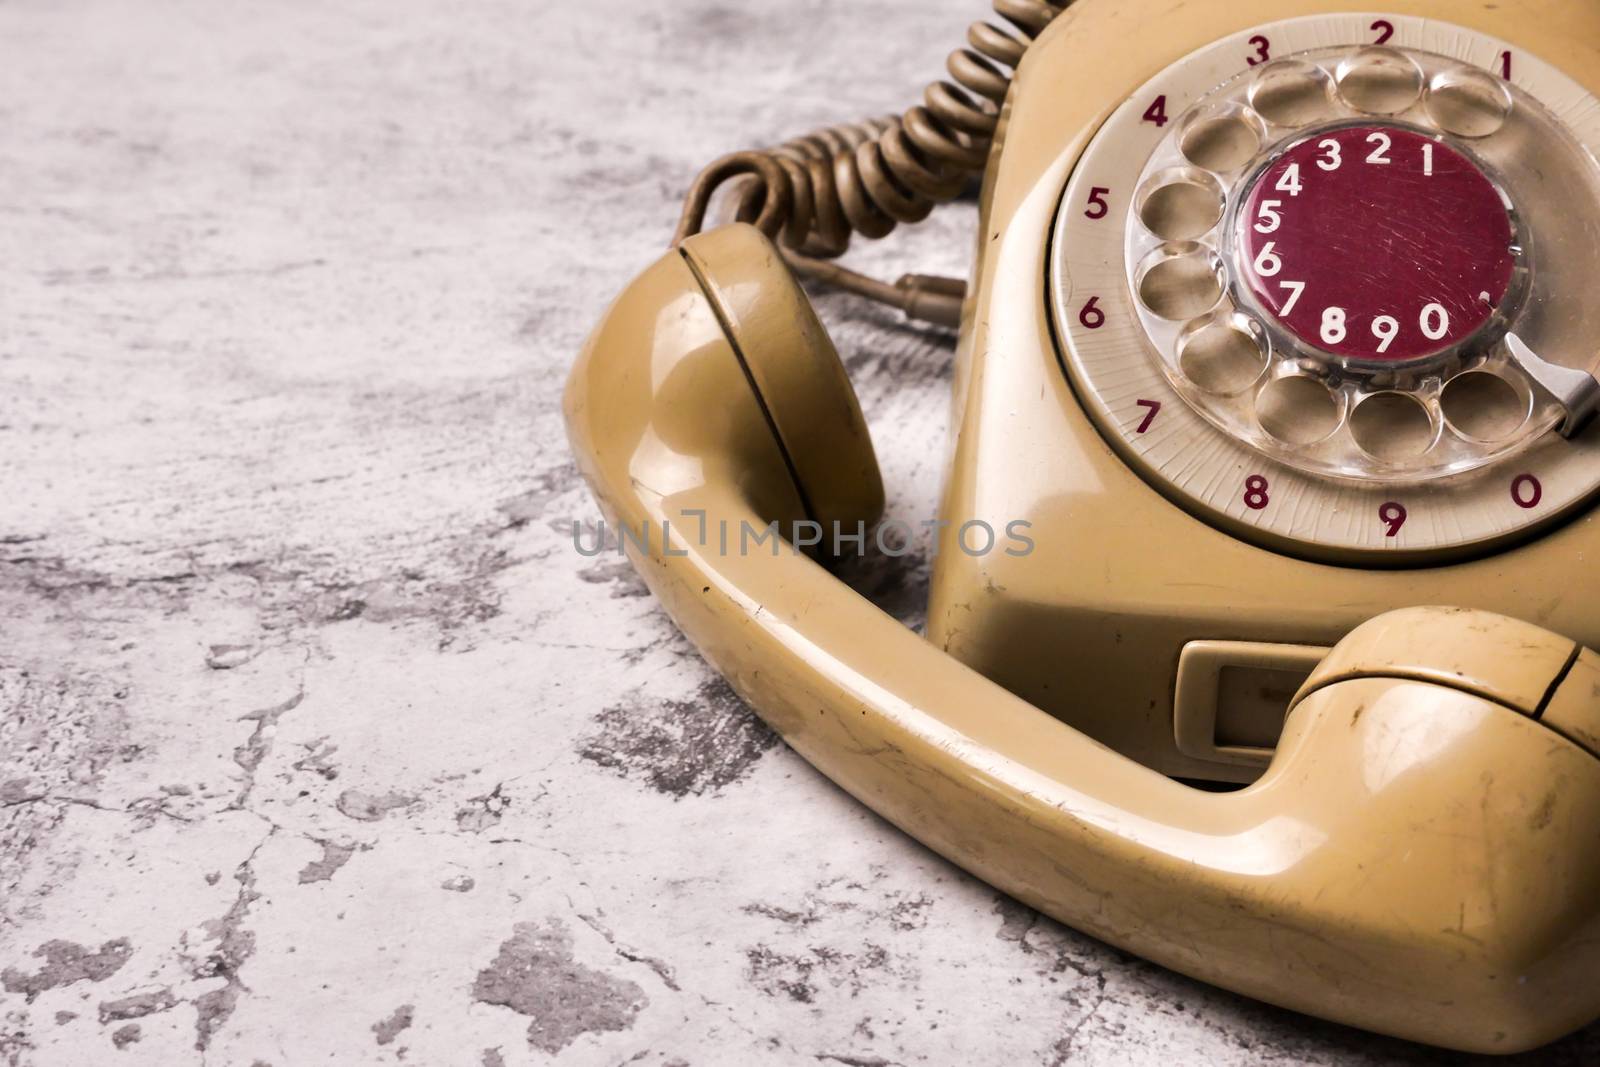 An old telephone with rotary dial on a grunge background.